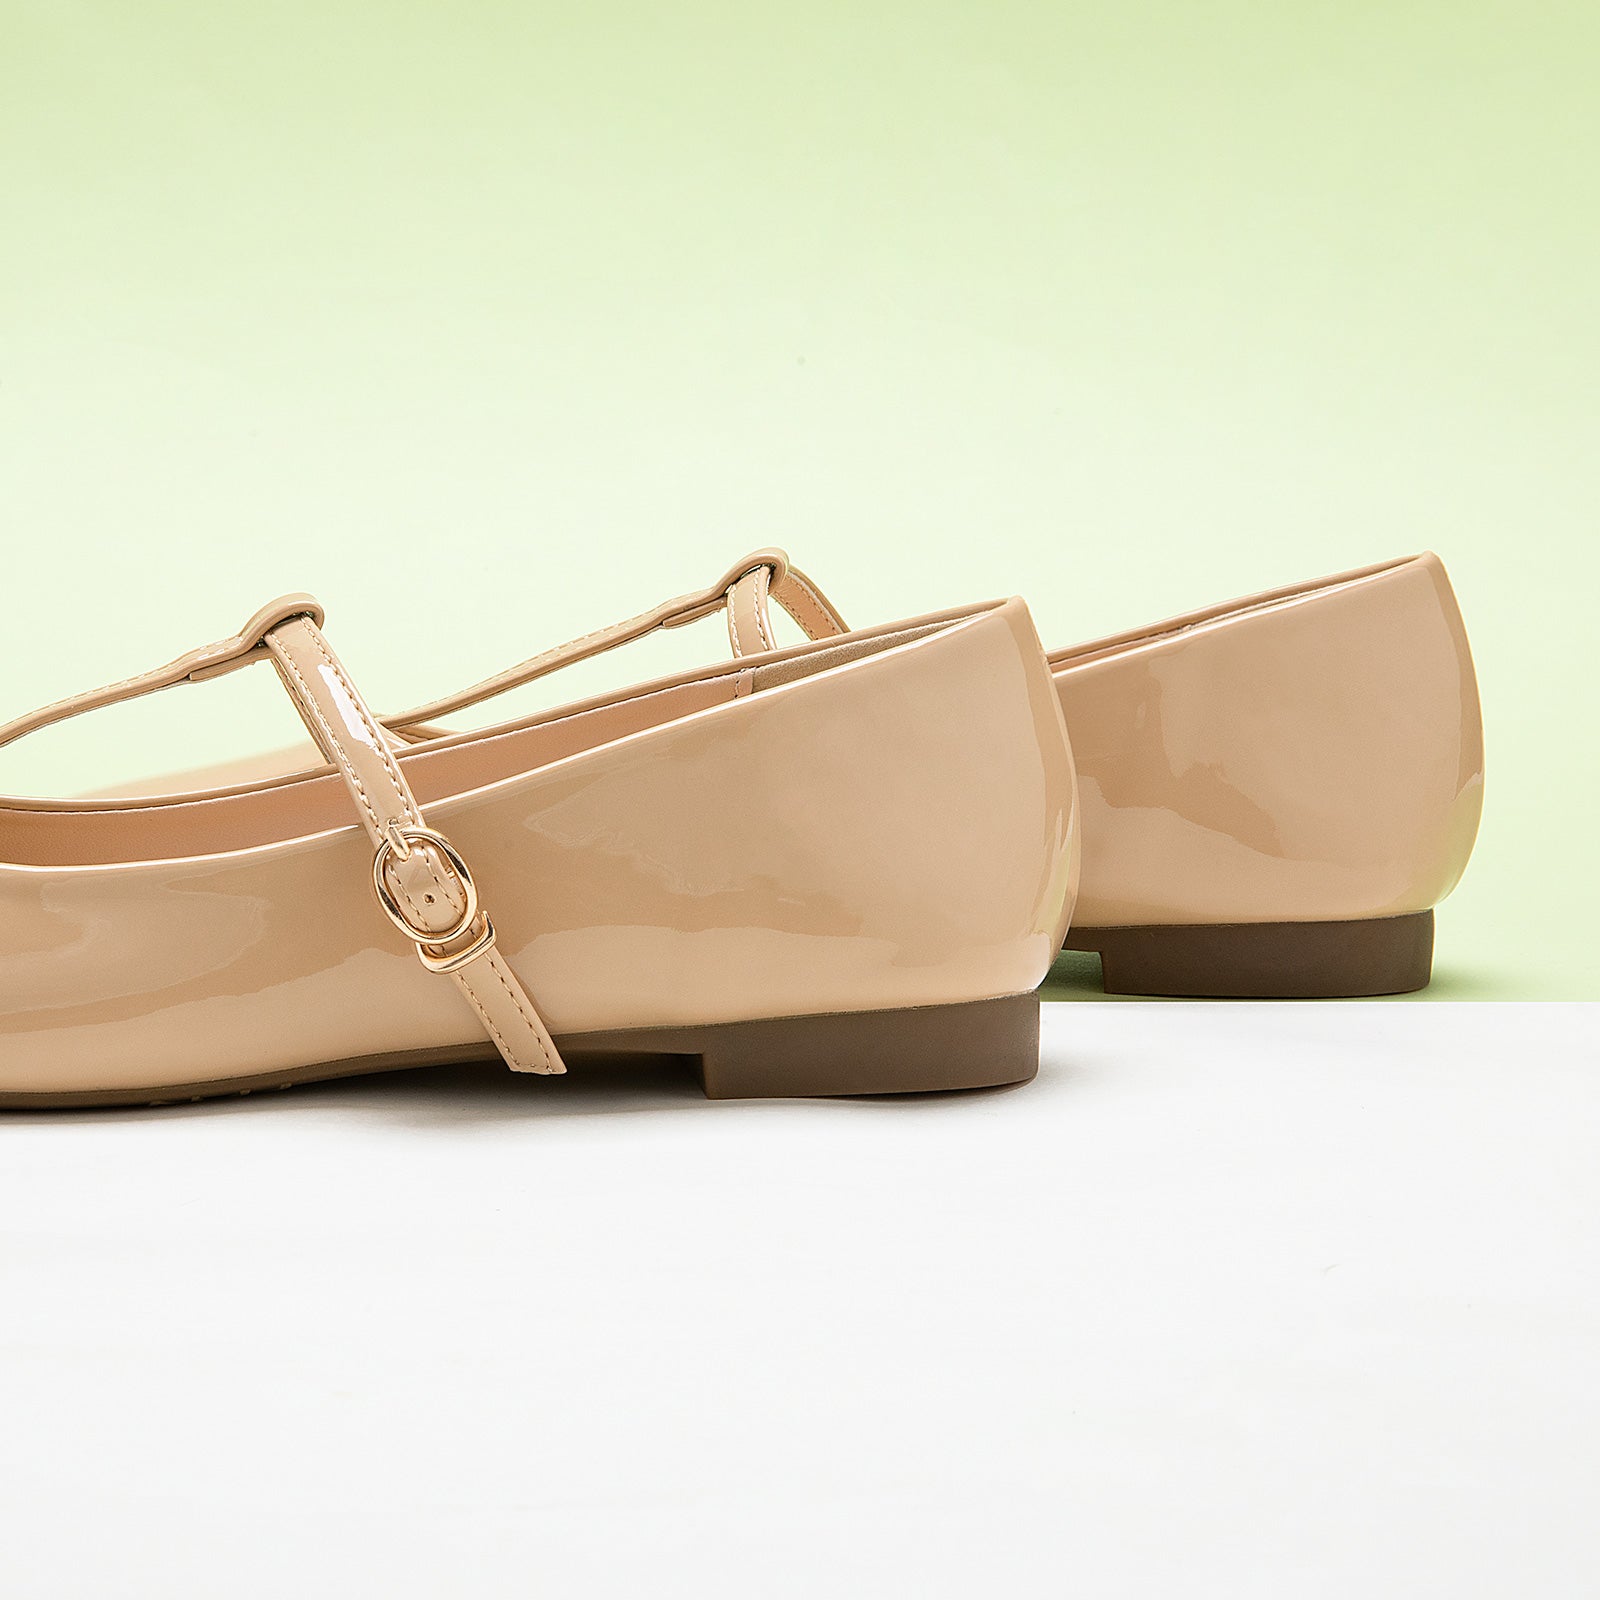 Beige Patent Mary Jane with Crossed Stripes, a perfect blend of comfort and everyday style.